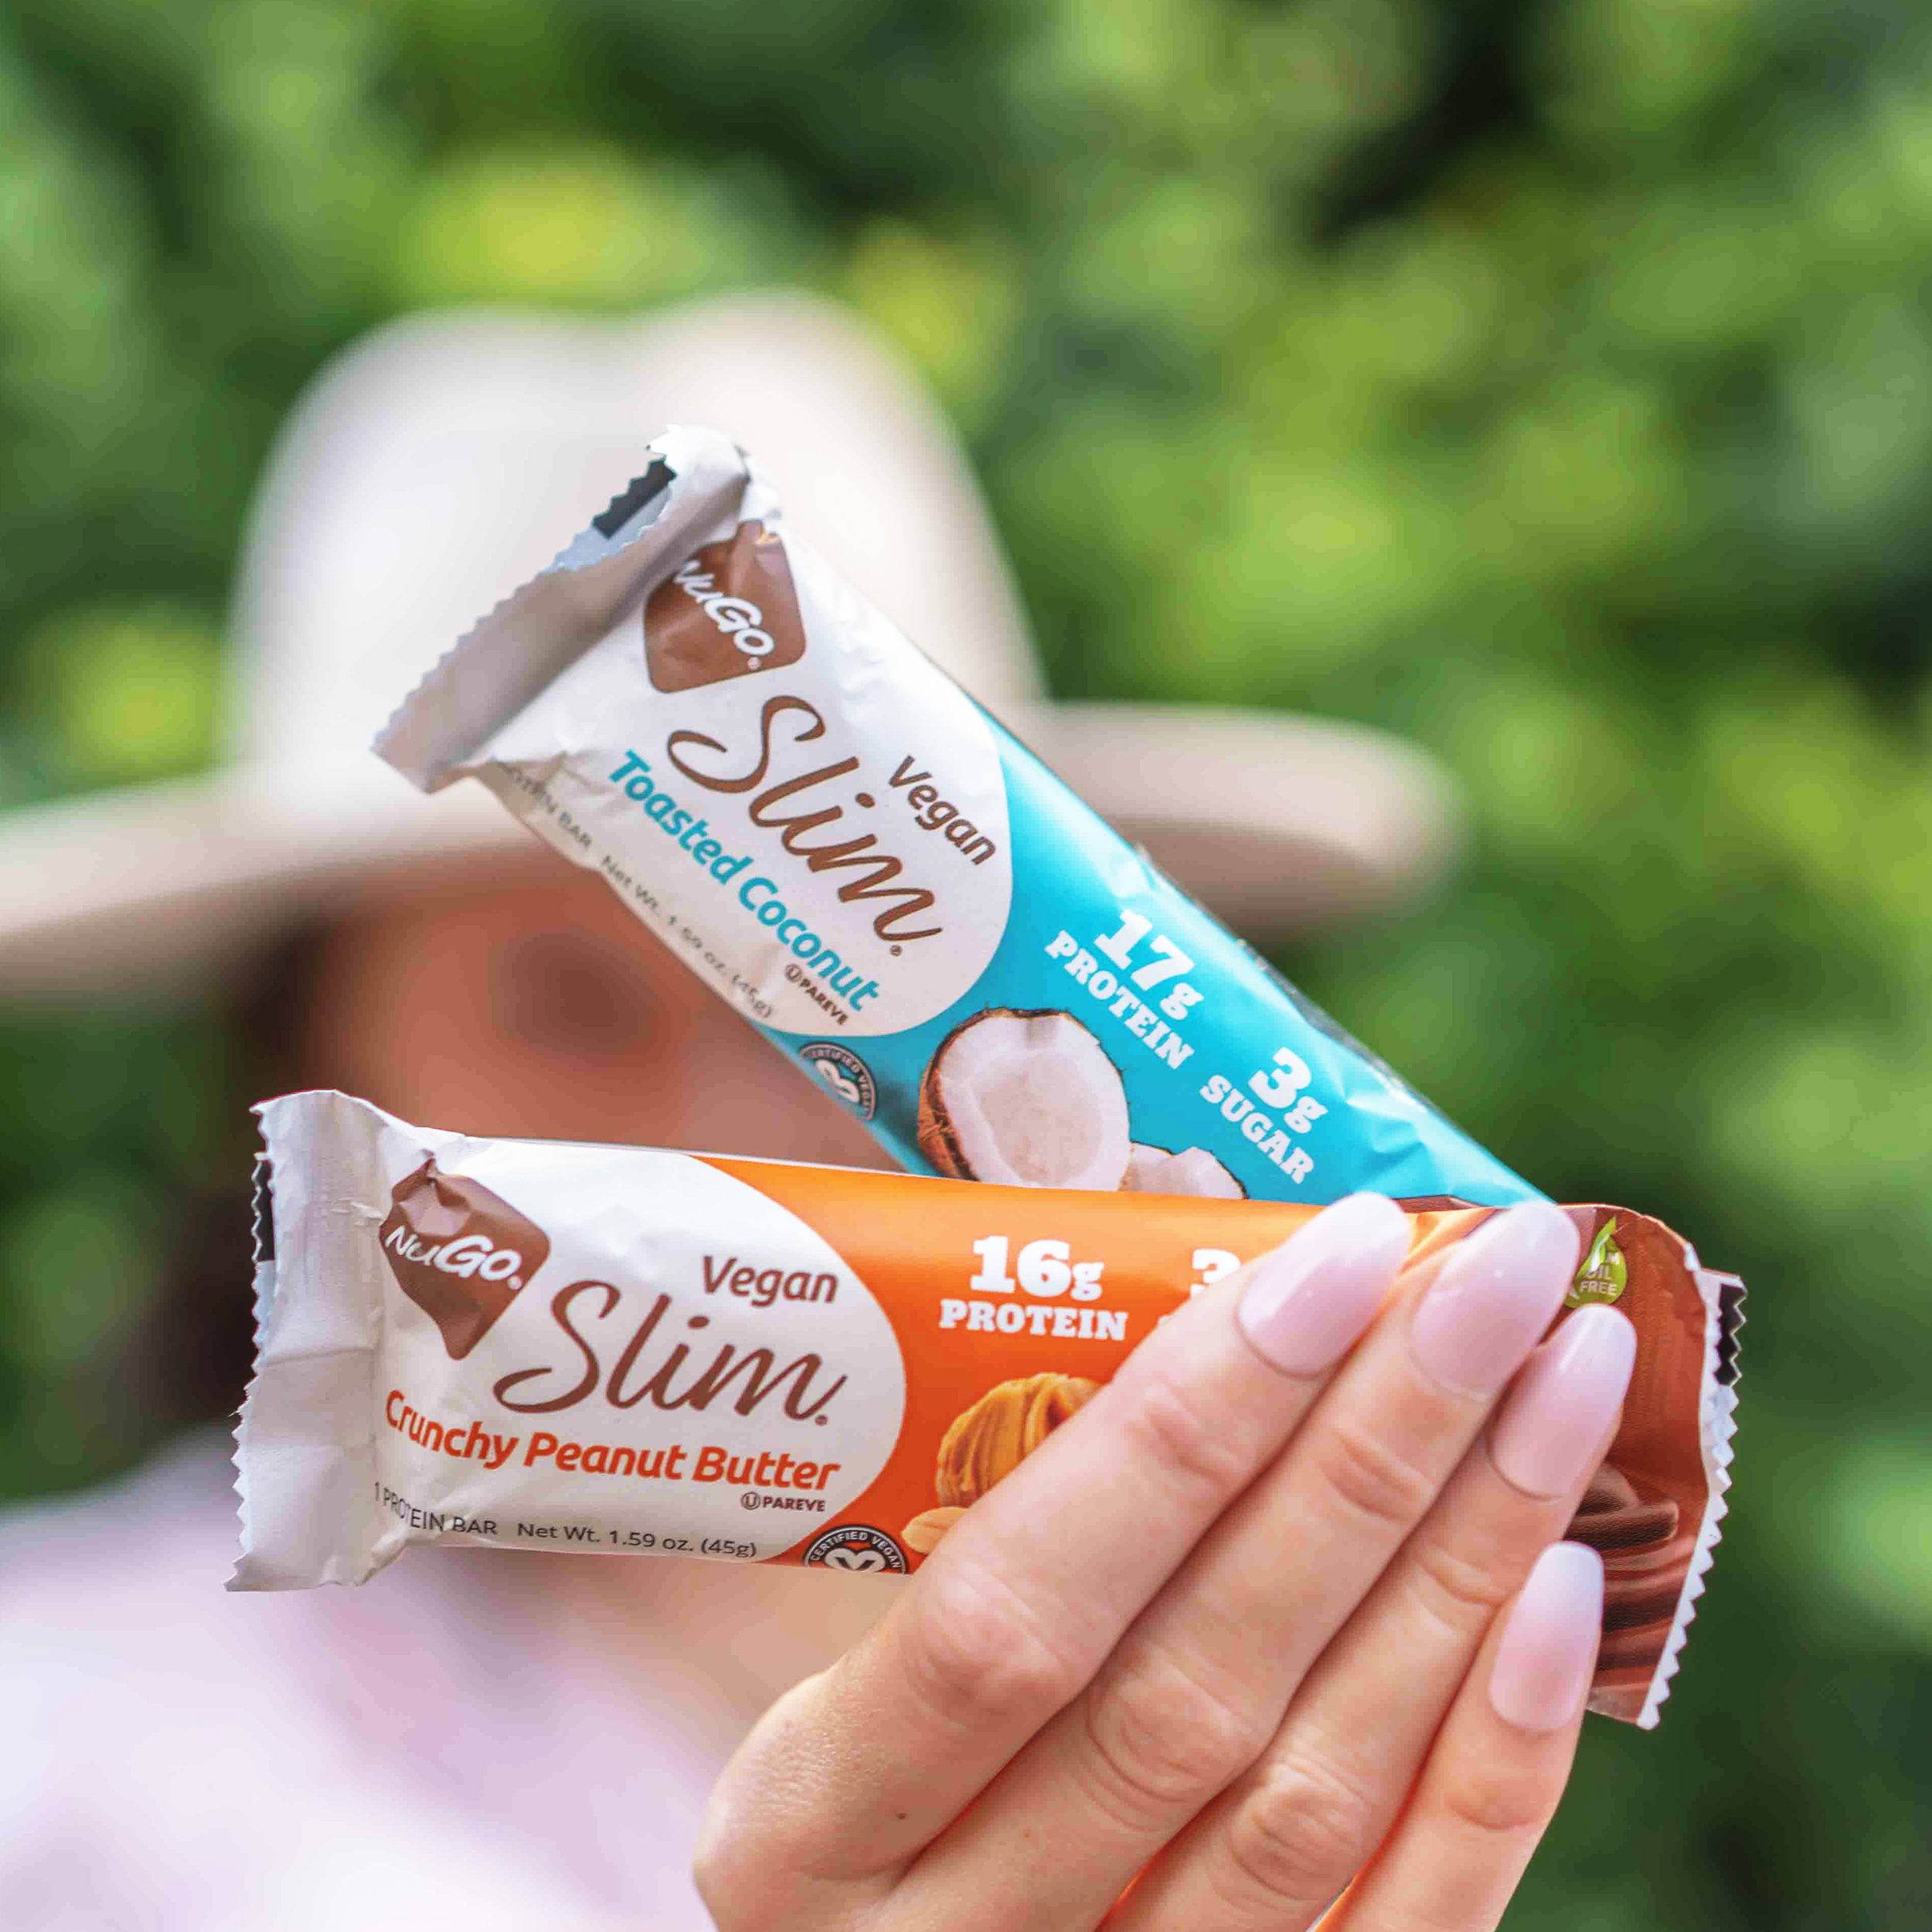 NuGo Slim Crunchy Peanut Butter and Toasted Almond in woman's hand, close up and outside